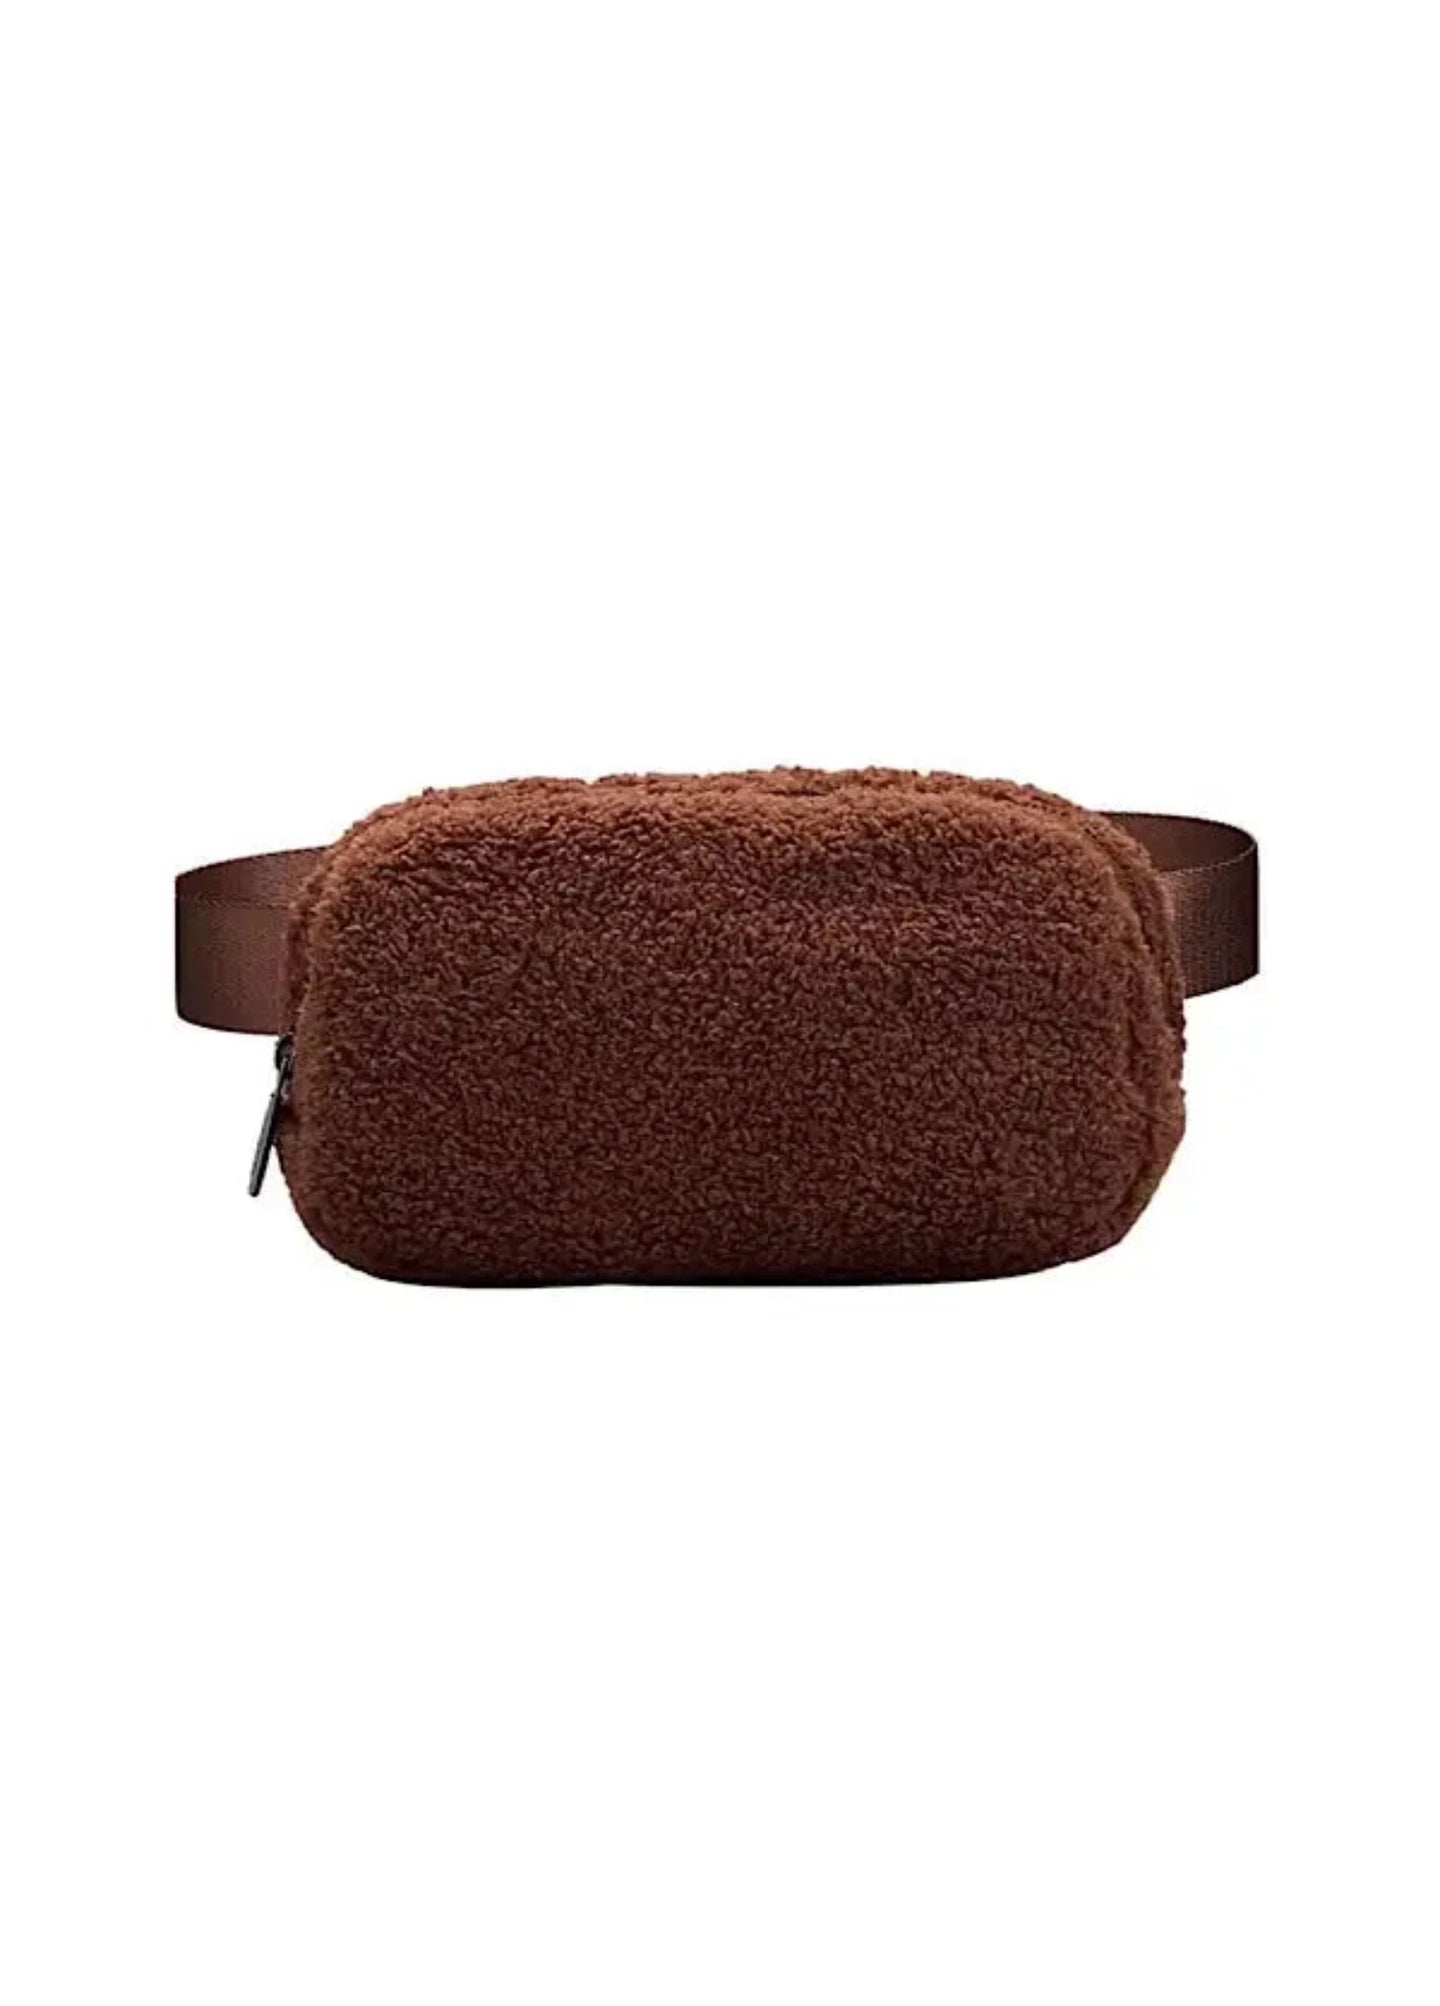 upper east side sherpa crossbody bag in the color coffee